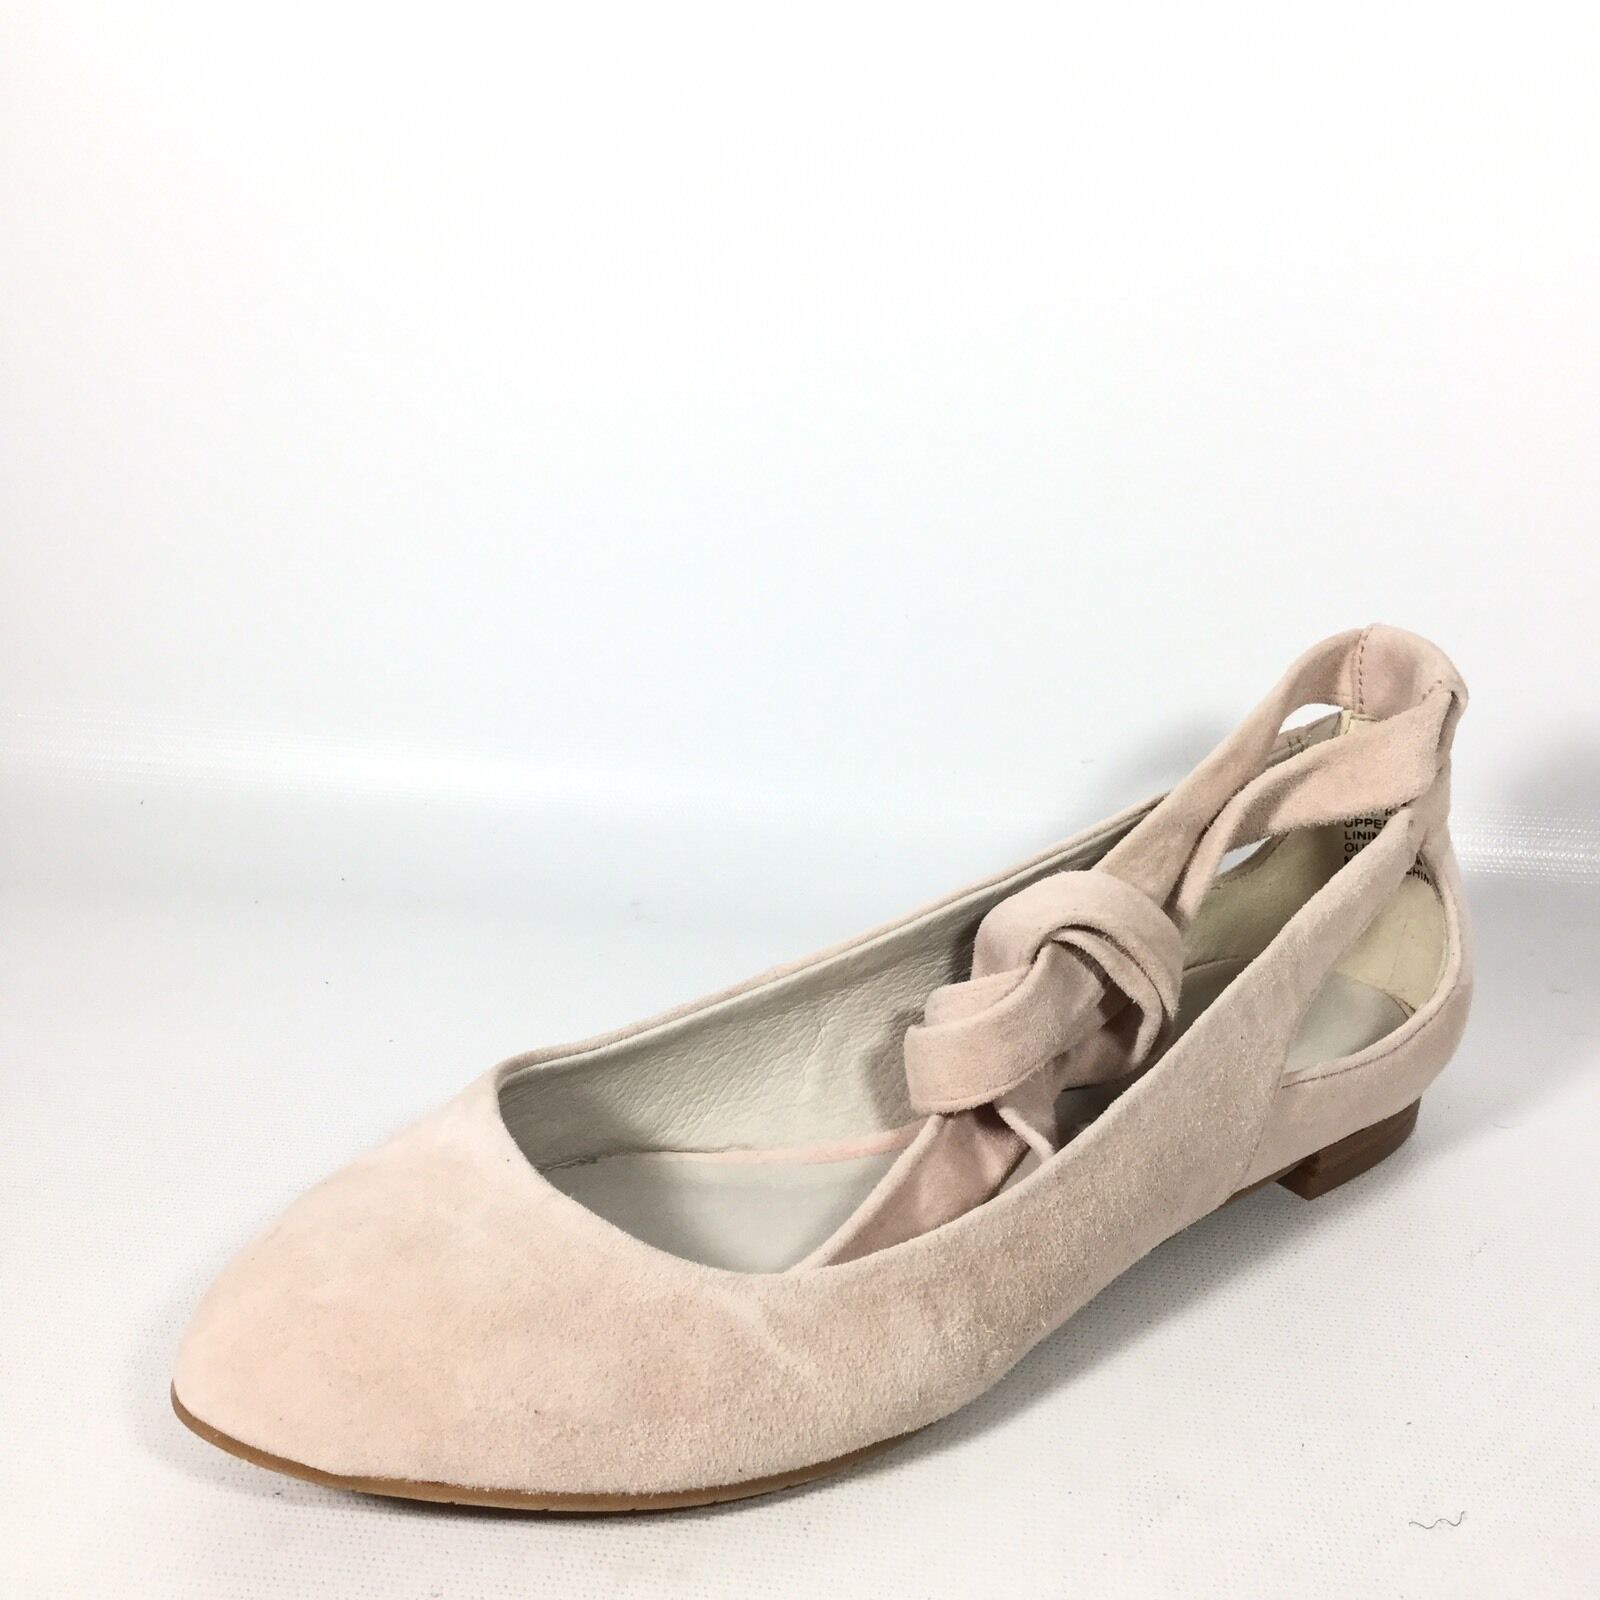 Kenneth Cole New York Wilhelmina Womens Size6 M Rose Suede Flat Shoes.